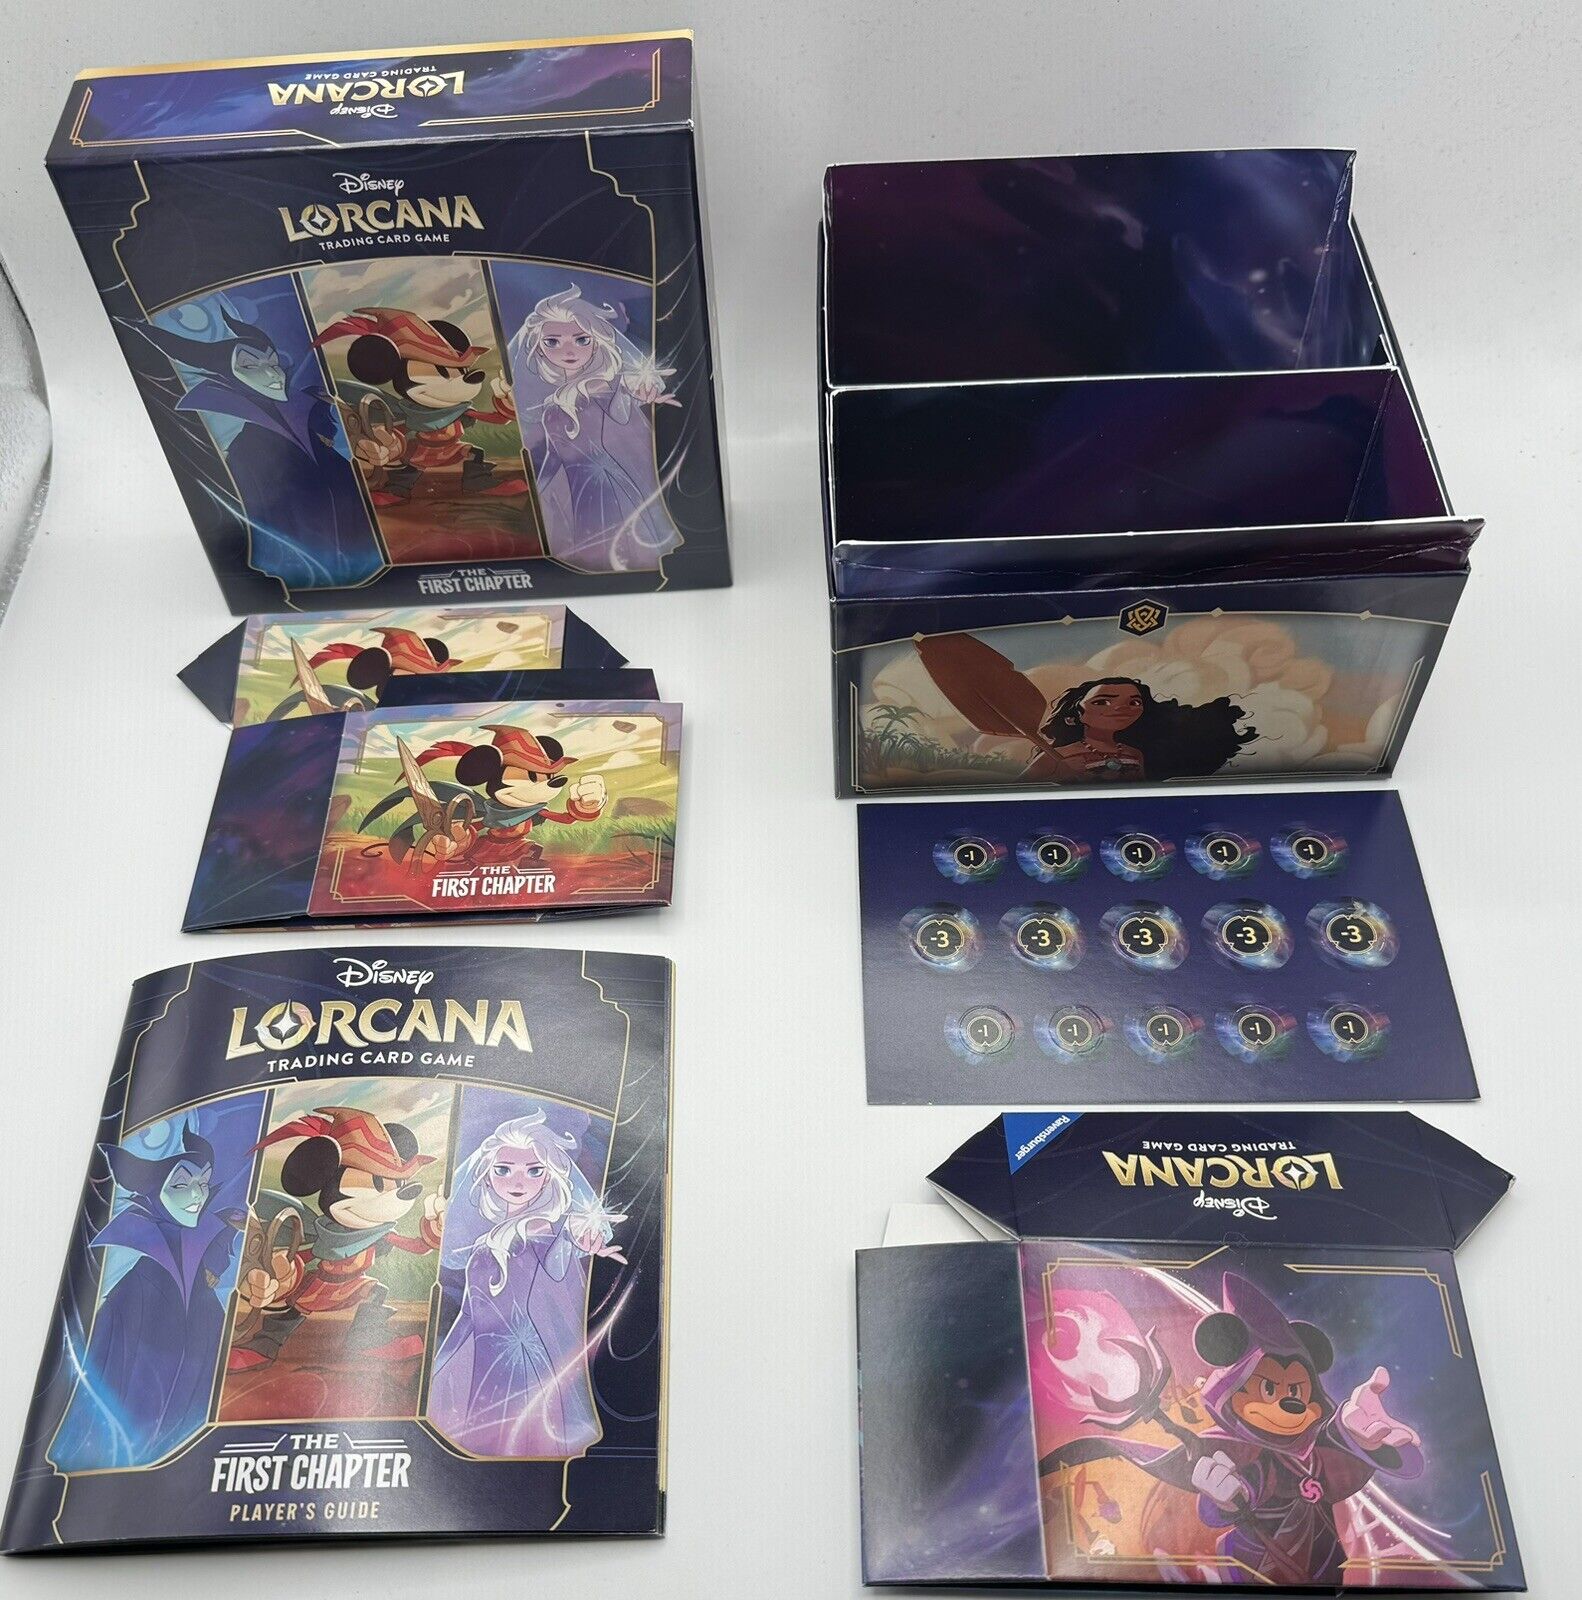 Disney Lorcana The First Chapter Illumineers Trove Box And Contents (No Packs)